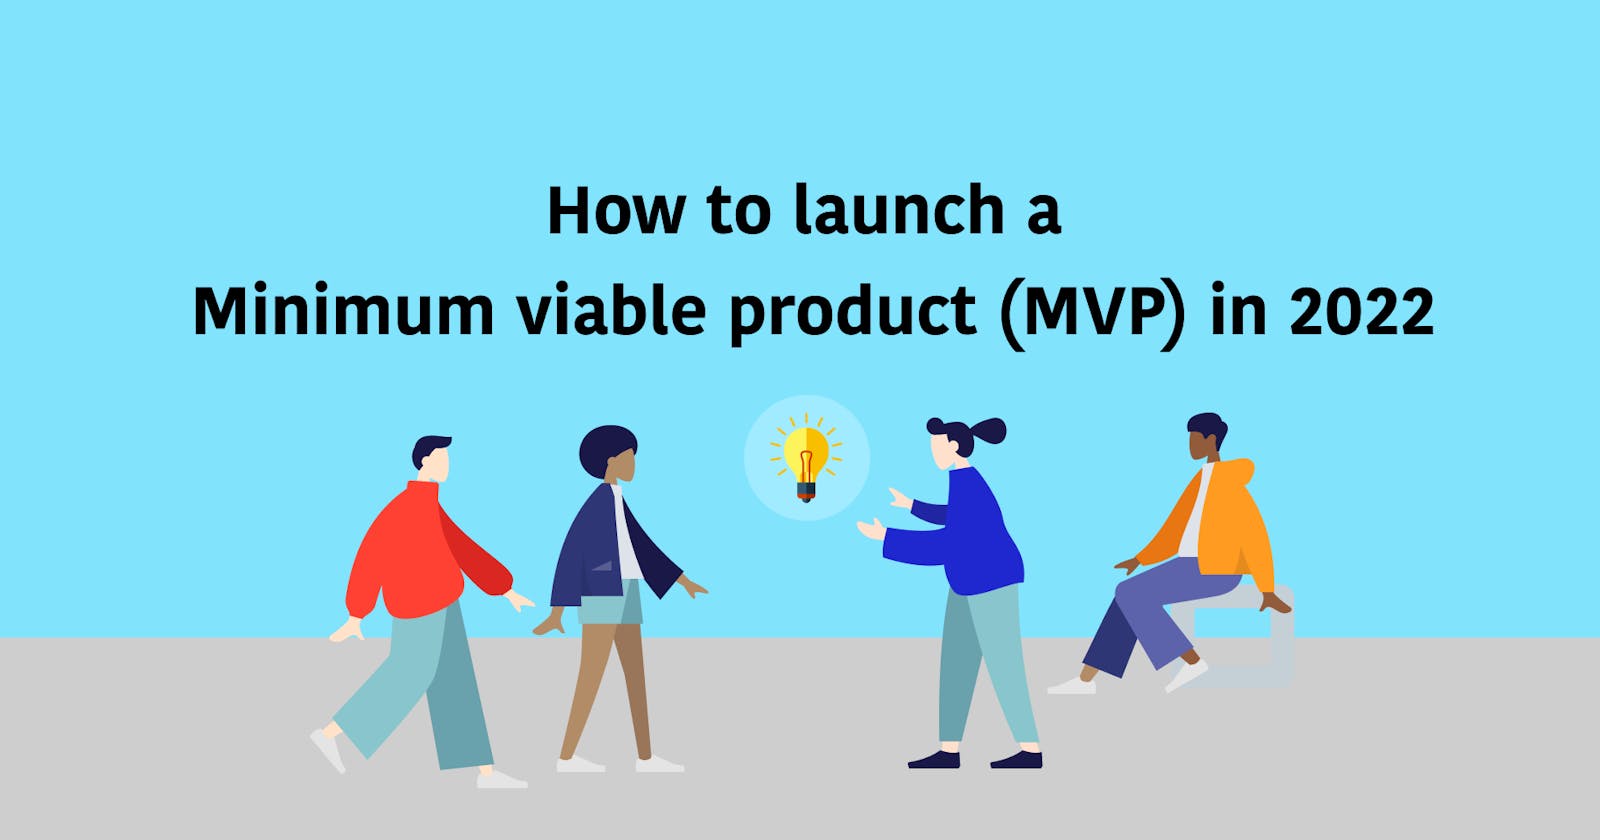 How to launch a Minimum viable product (MVP) in 2022